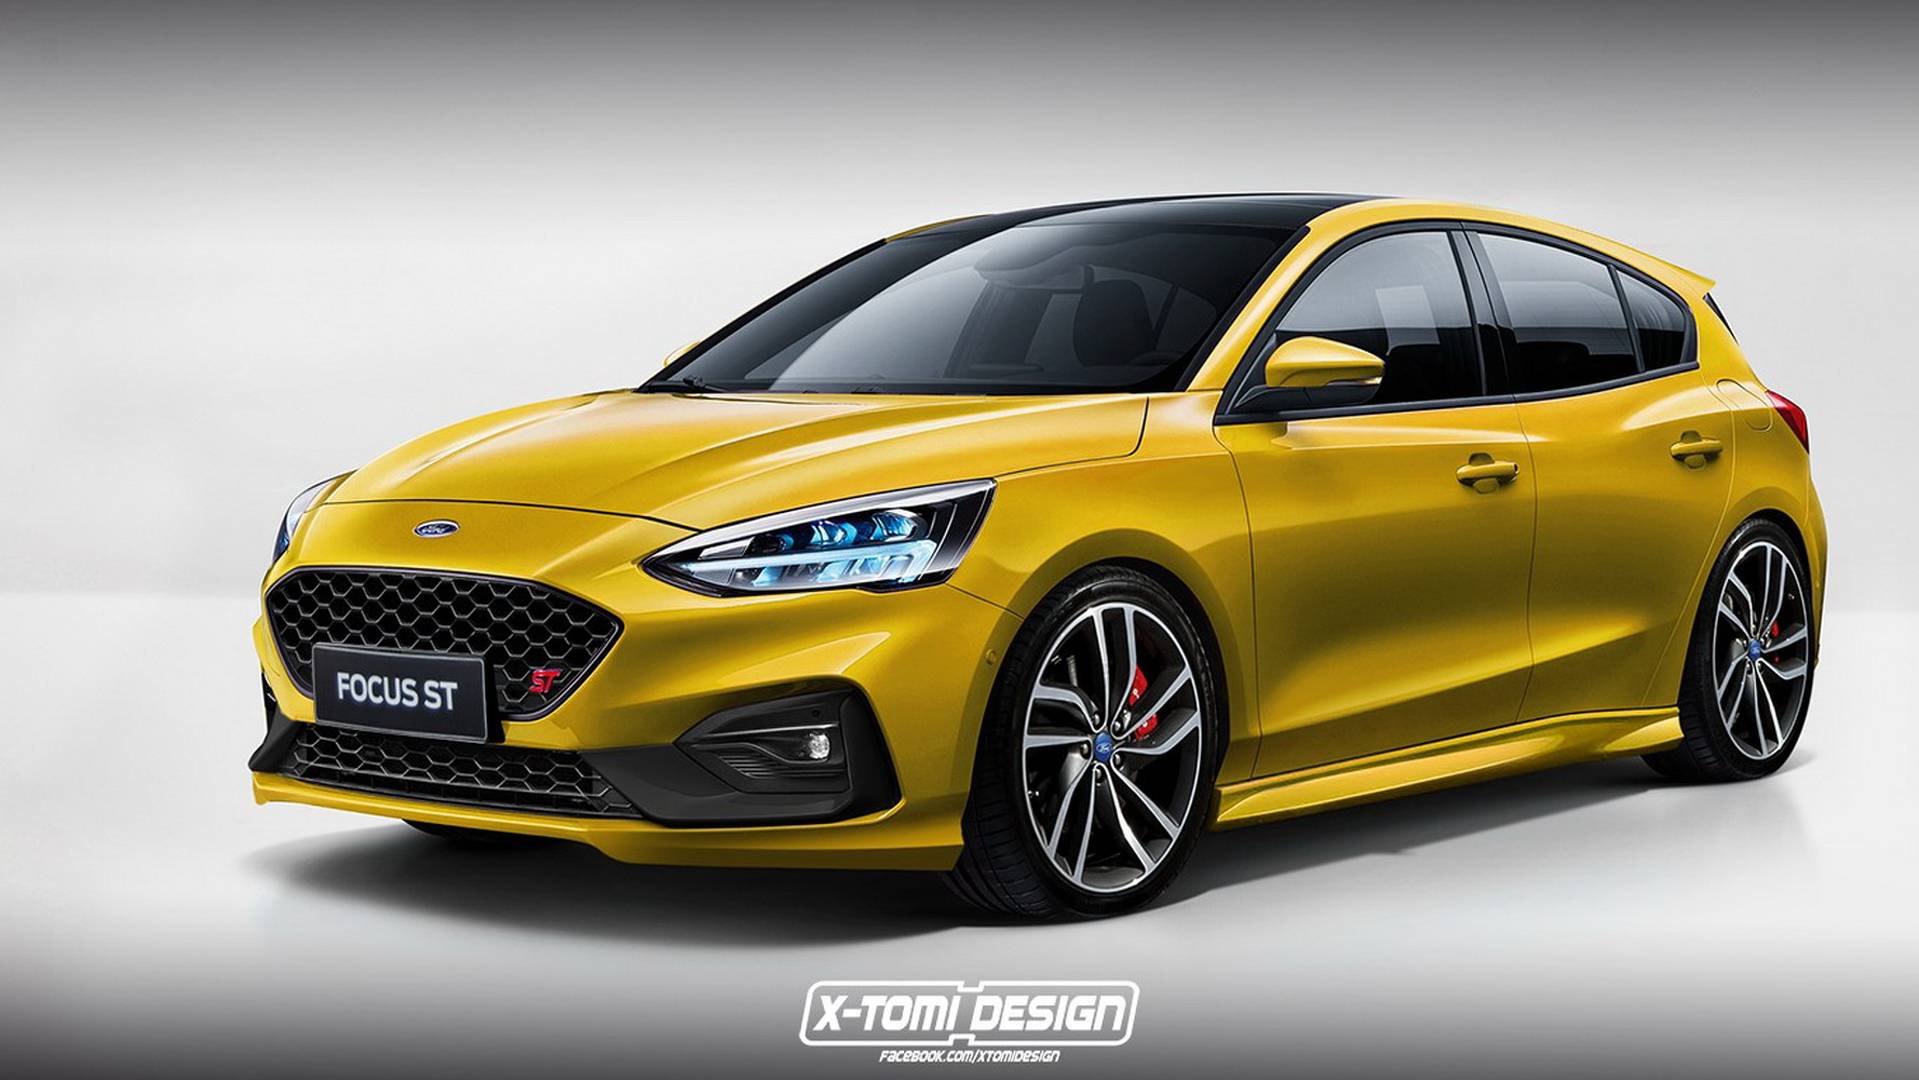 Of Course Someone Has Already Rendered The New Ford Focus ST, RS